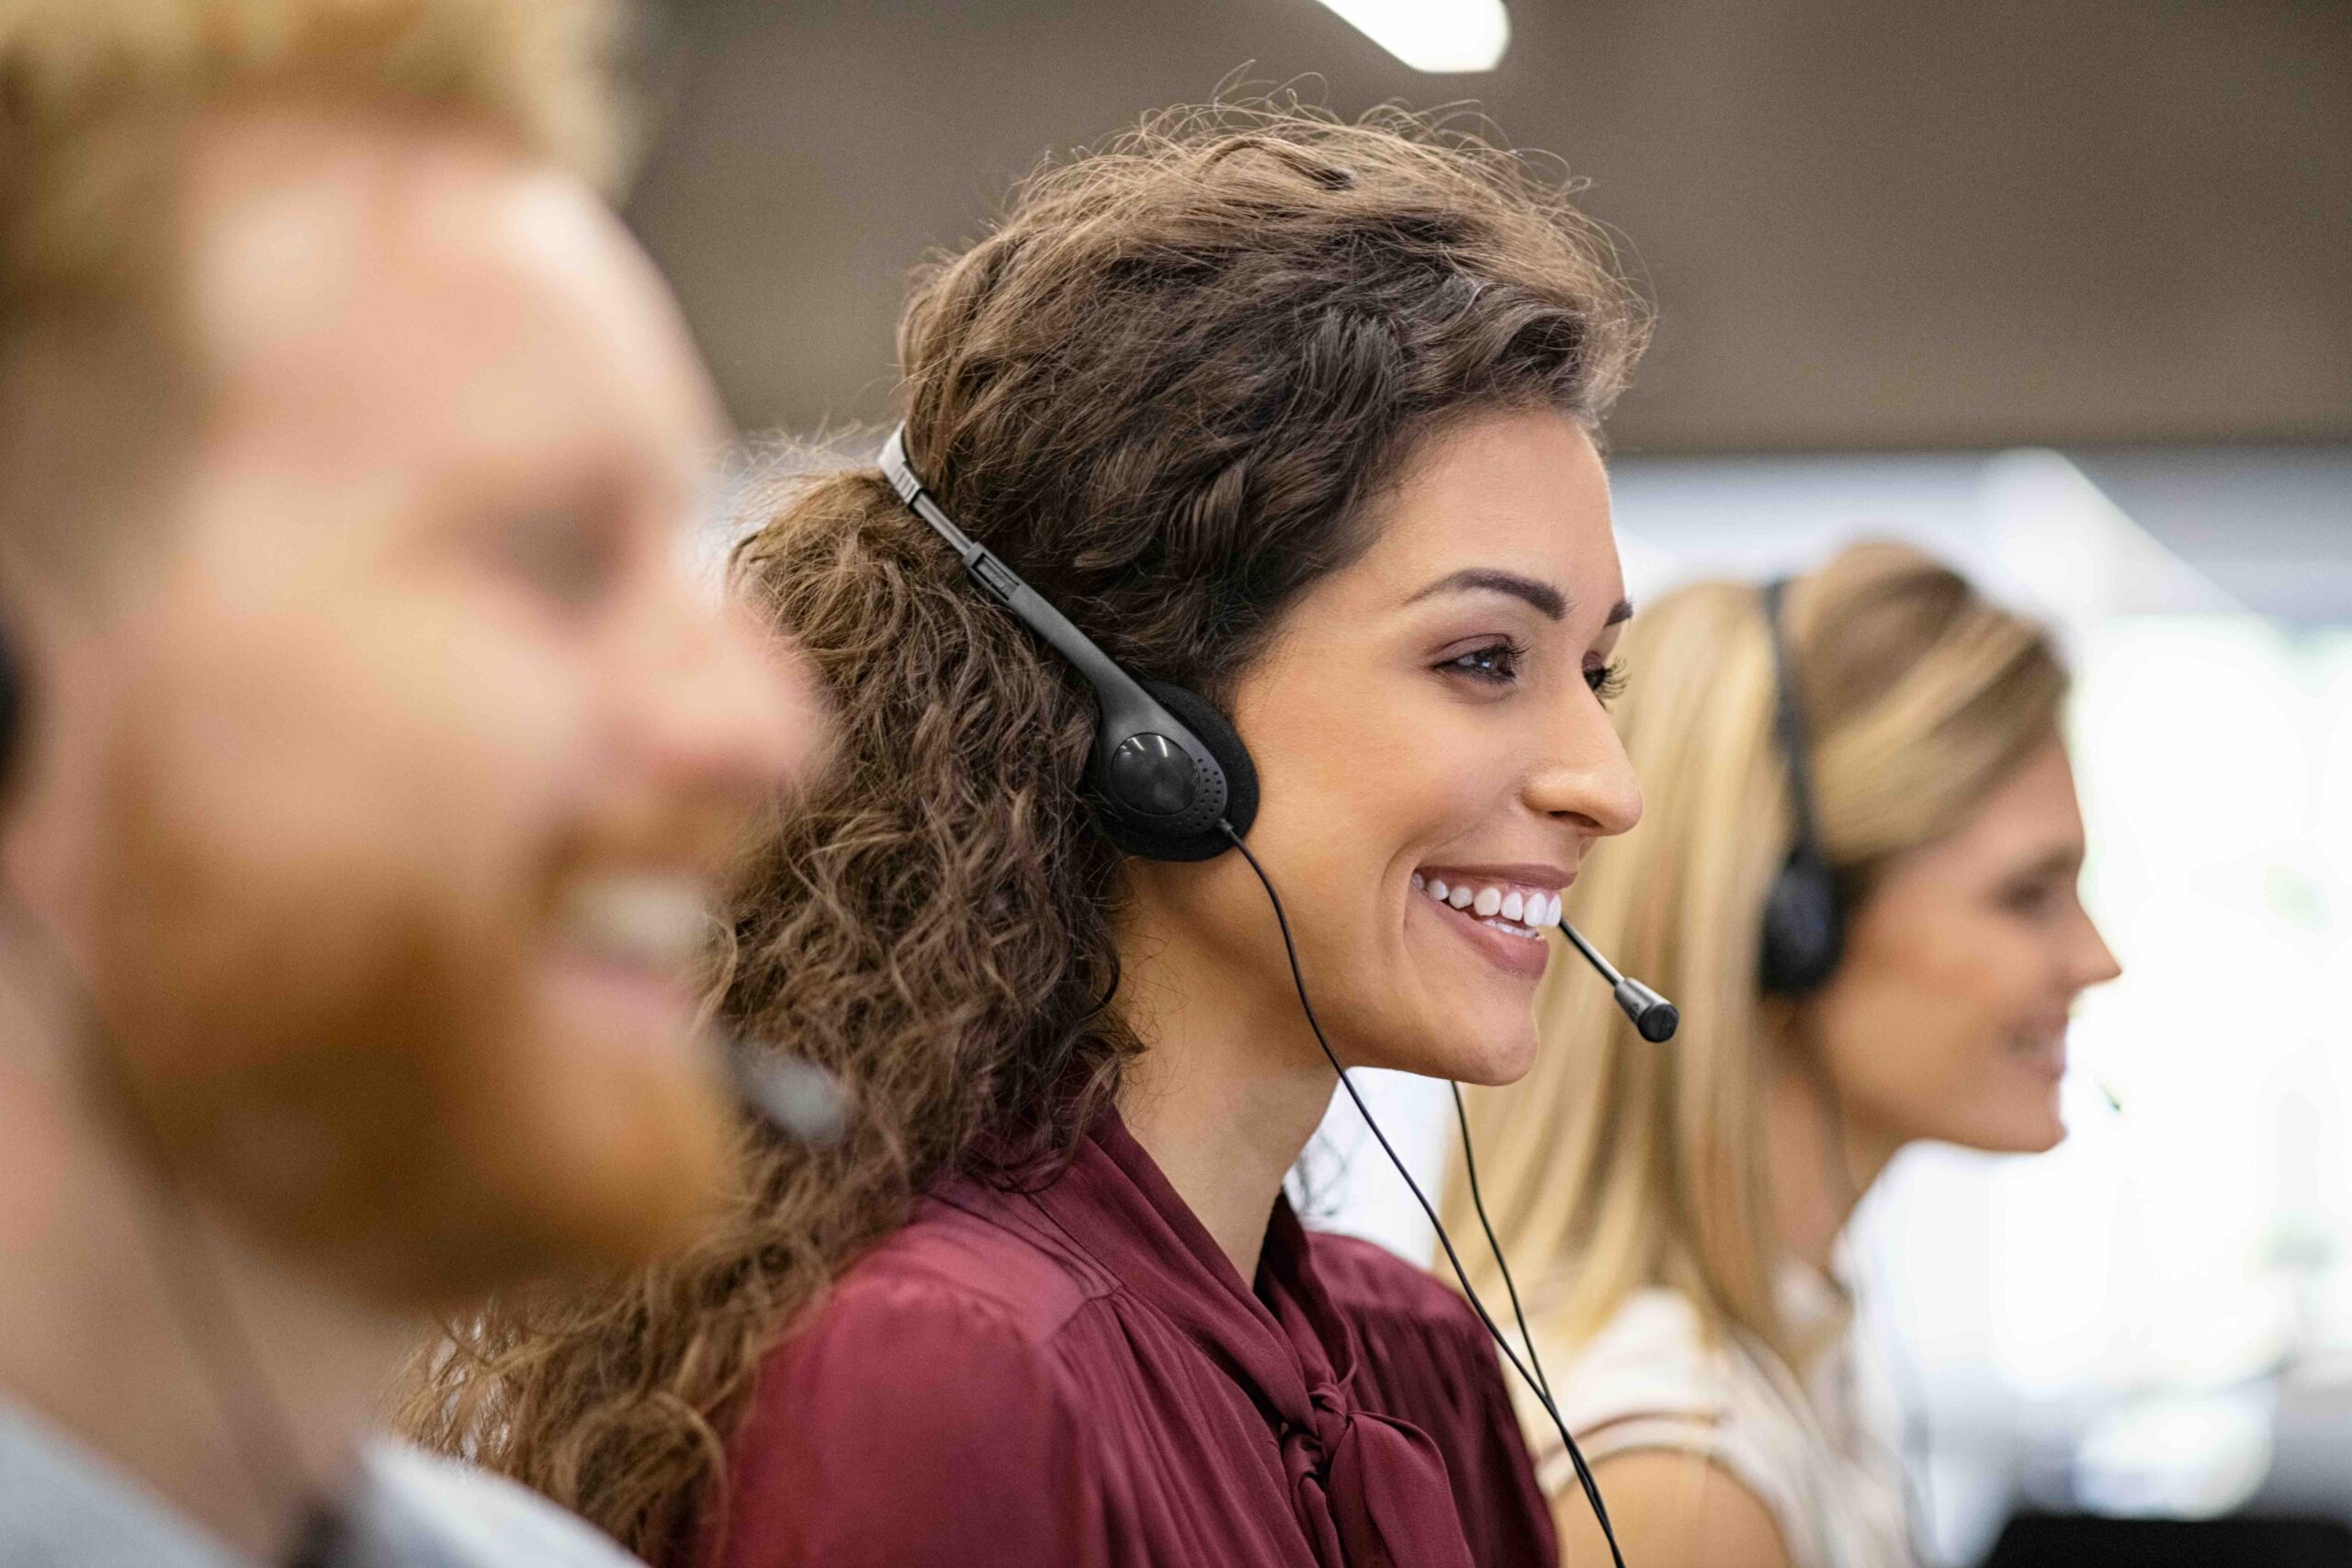 Smiling woman call center operator doing her job with a headset while working on computer. Positive smiling agents in conversation with customer over headset, sitting in row. Consulting and assistance helpdesk service.